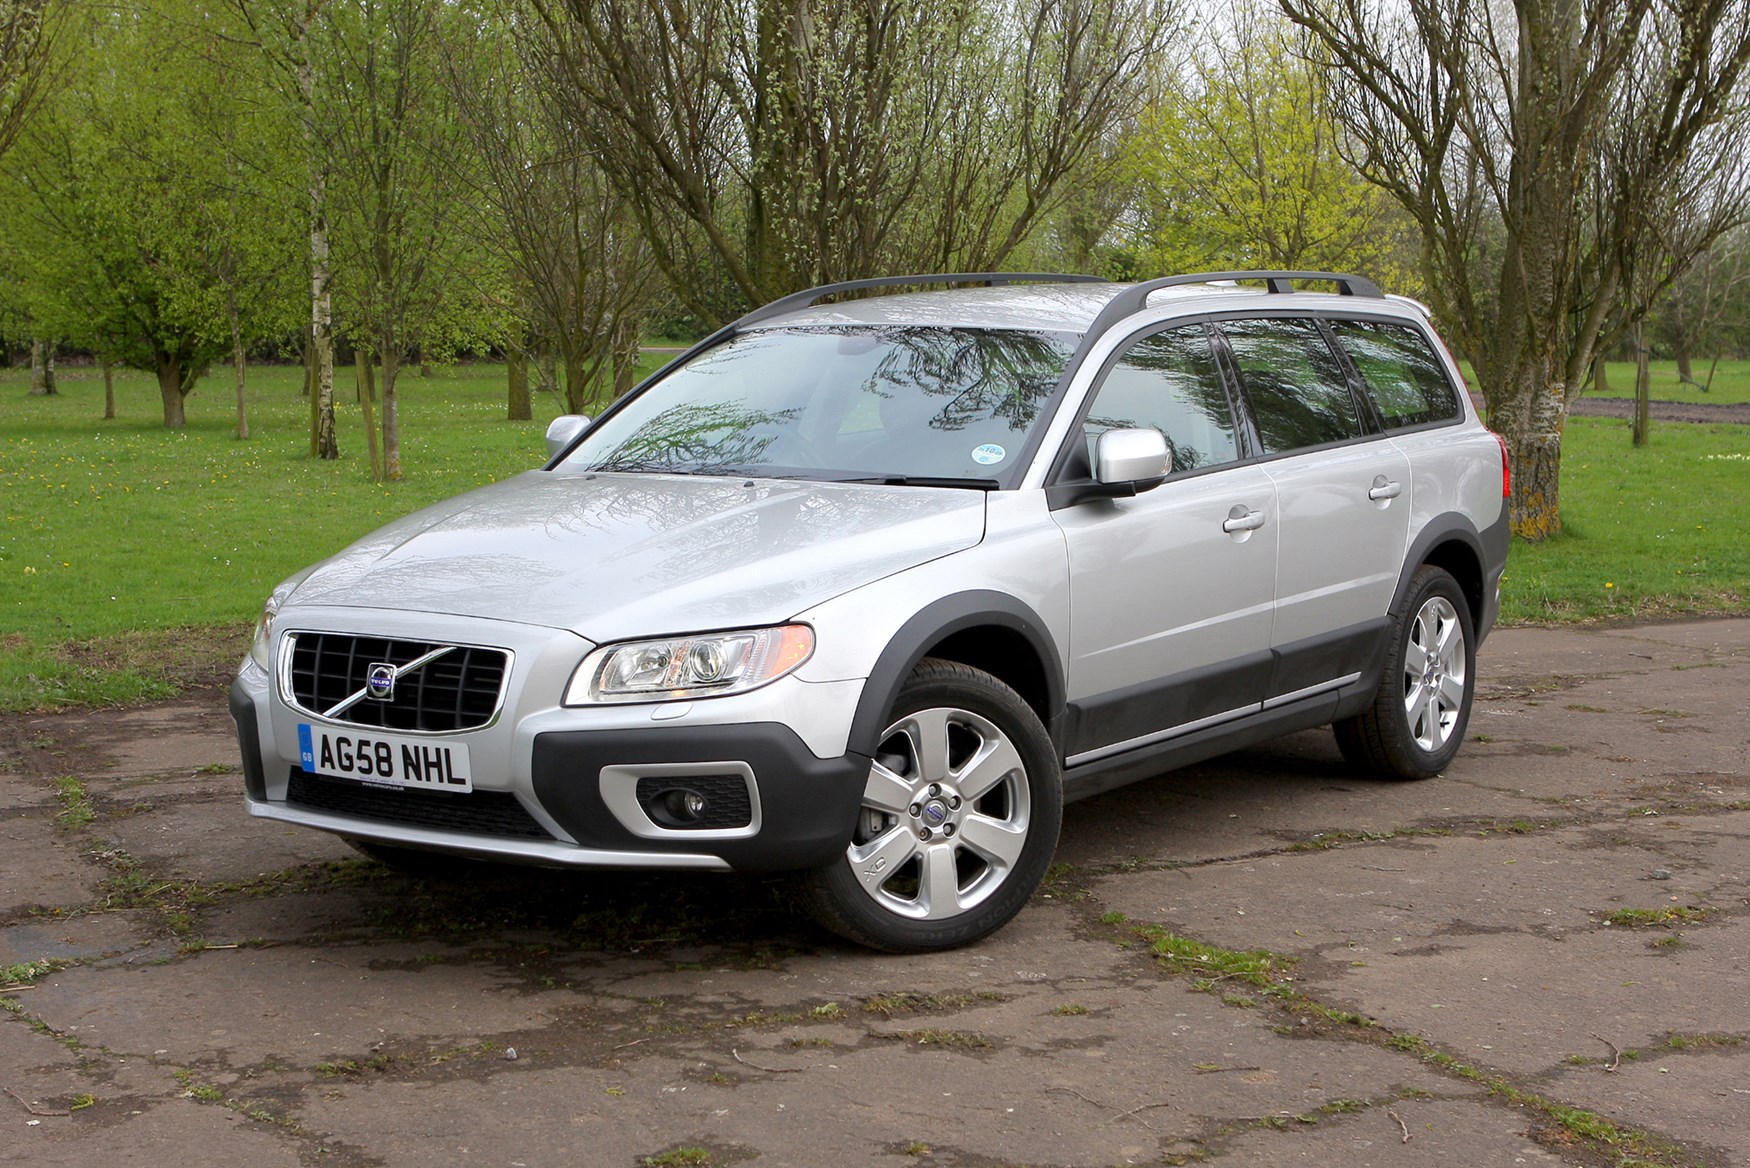 Used Volvo XC70 Estate (2007 - 2016) Review | Parkers